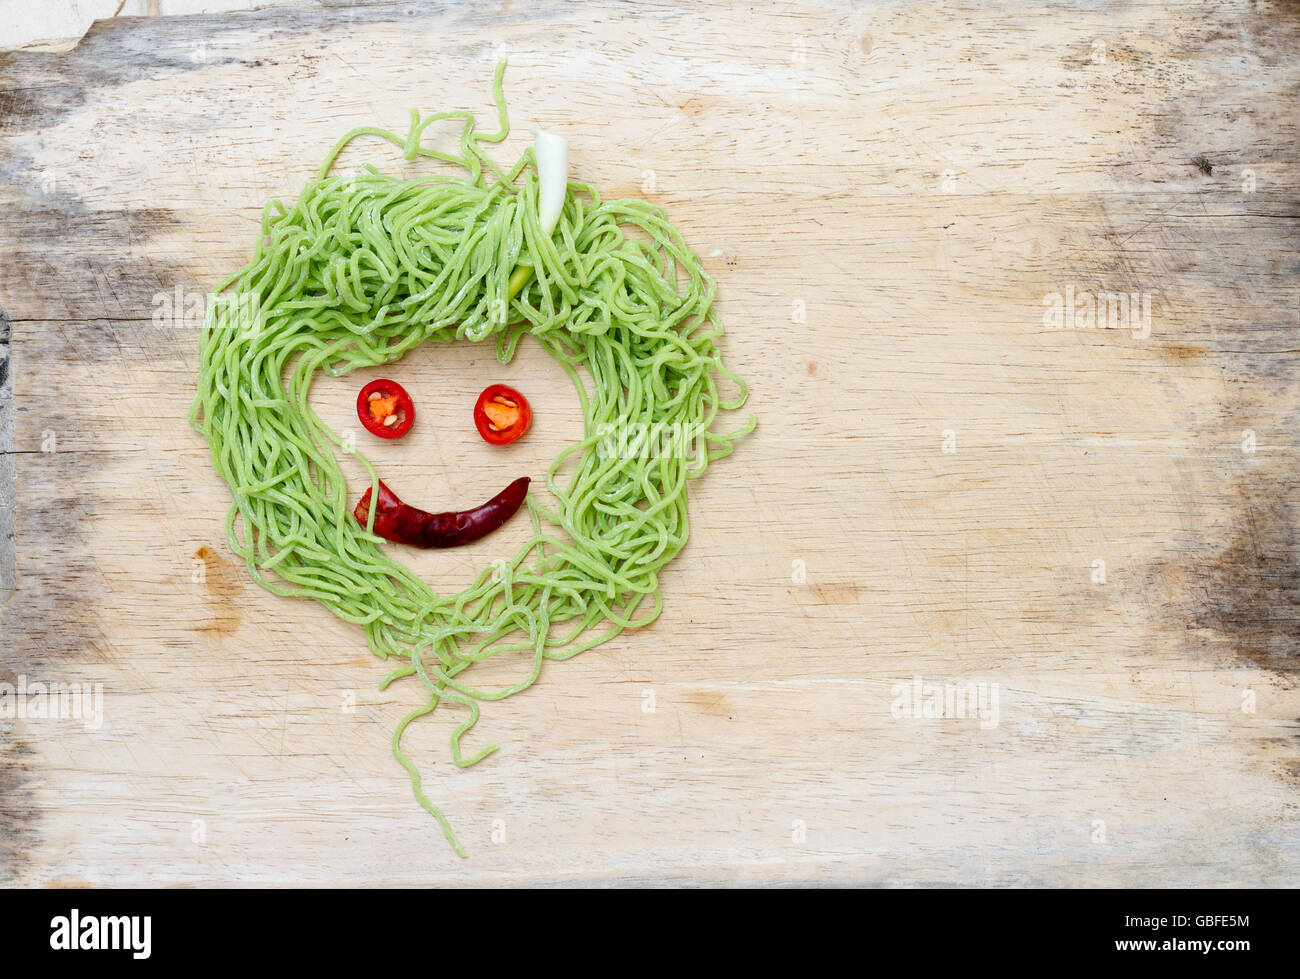 smiley face on wood made from vegetable and noodle Stock Photo